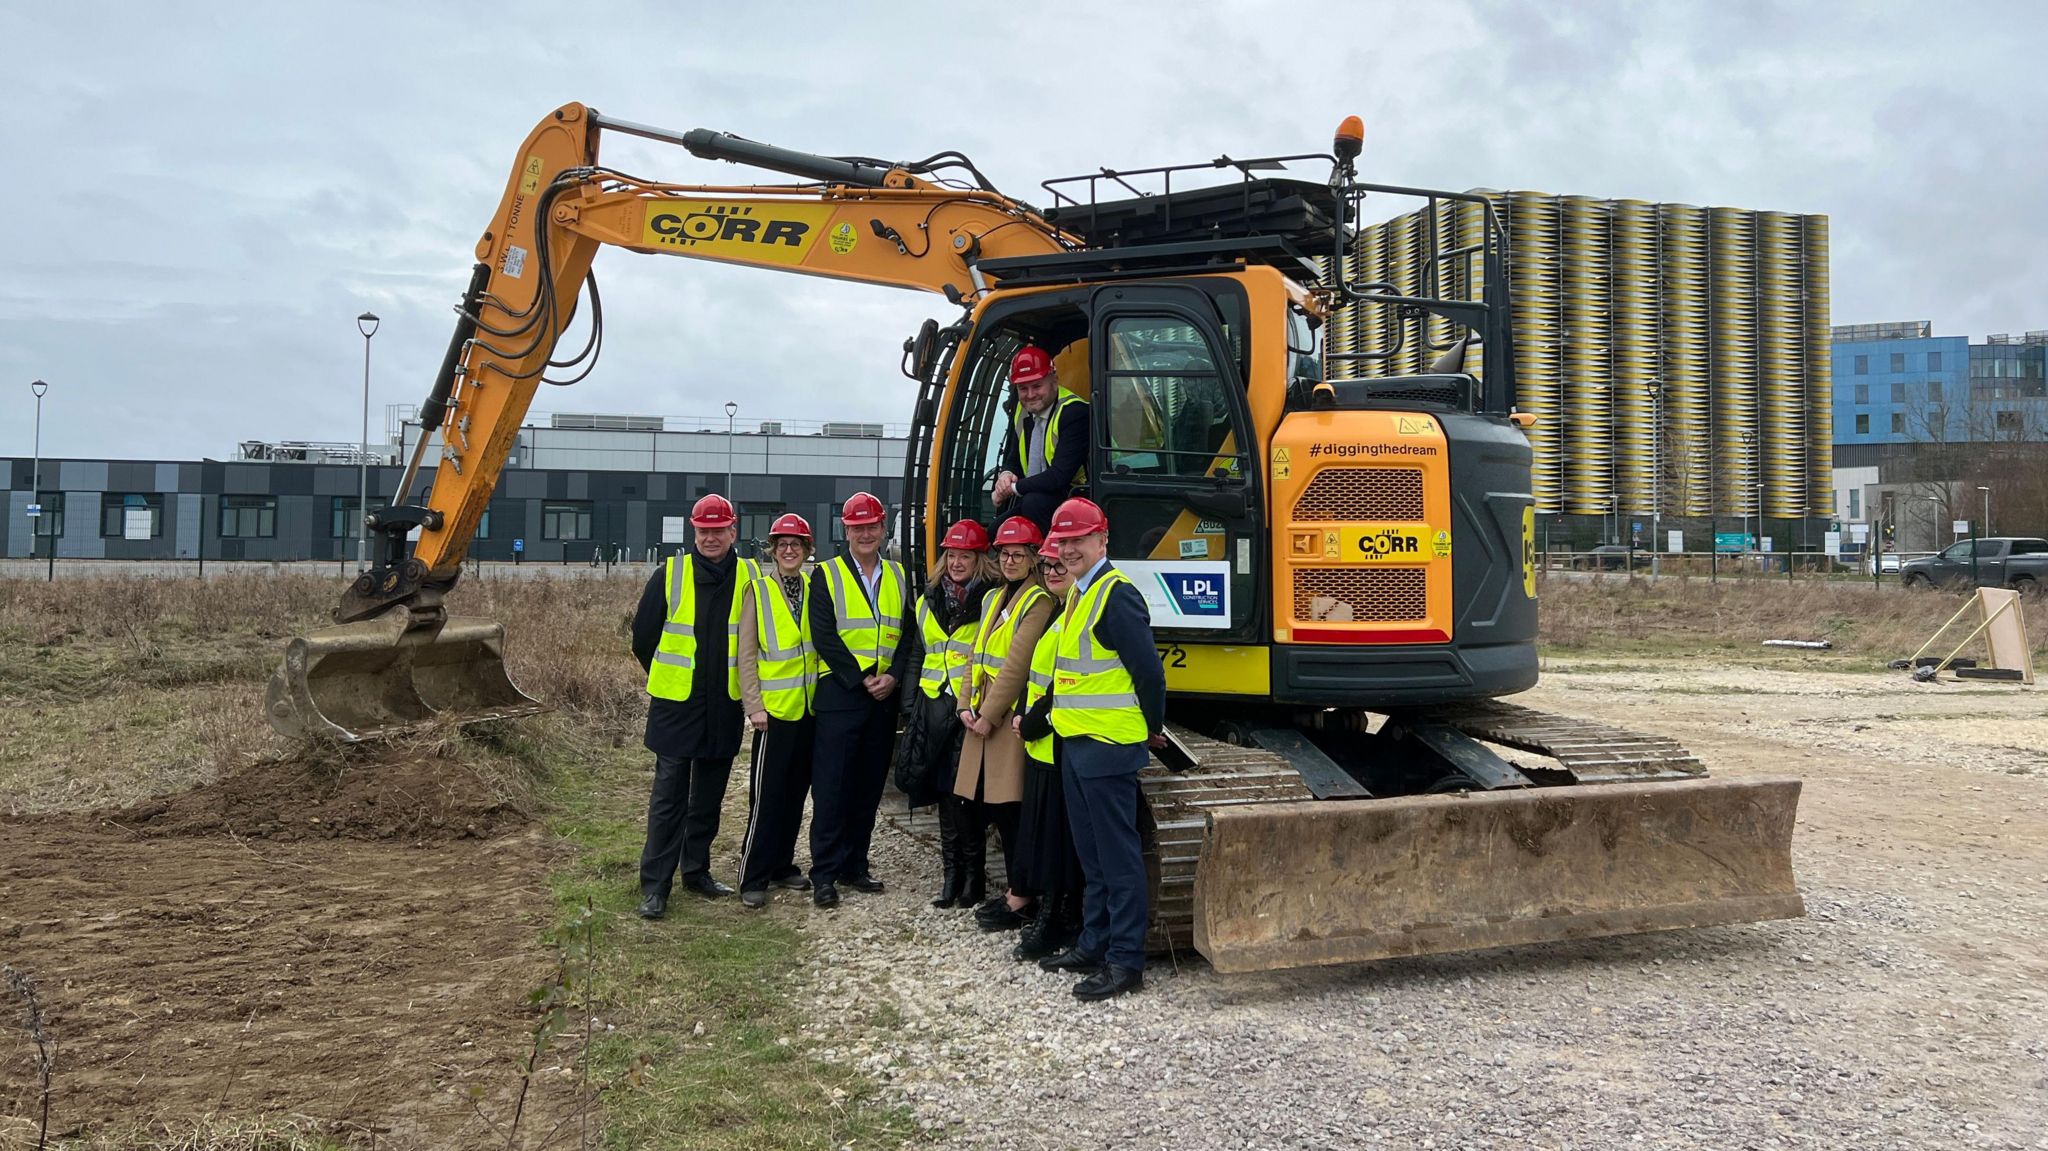 Andrew Stephenson and NHS staff in front of a digger